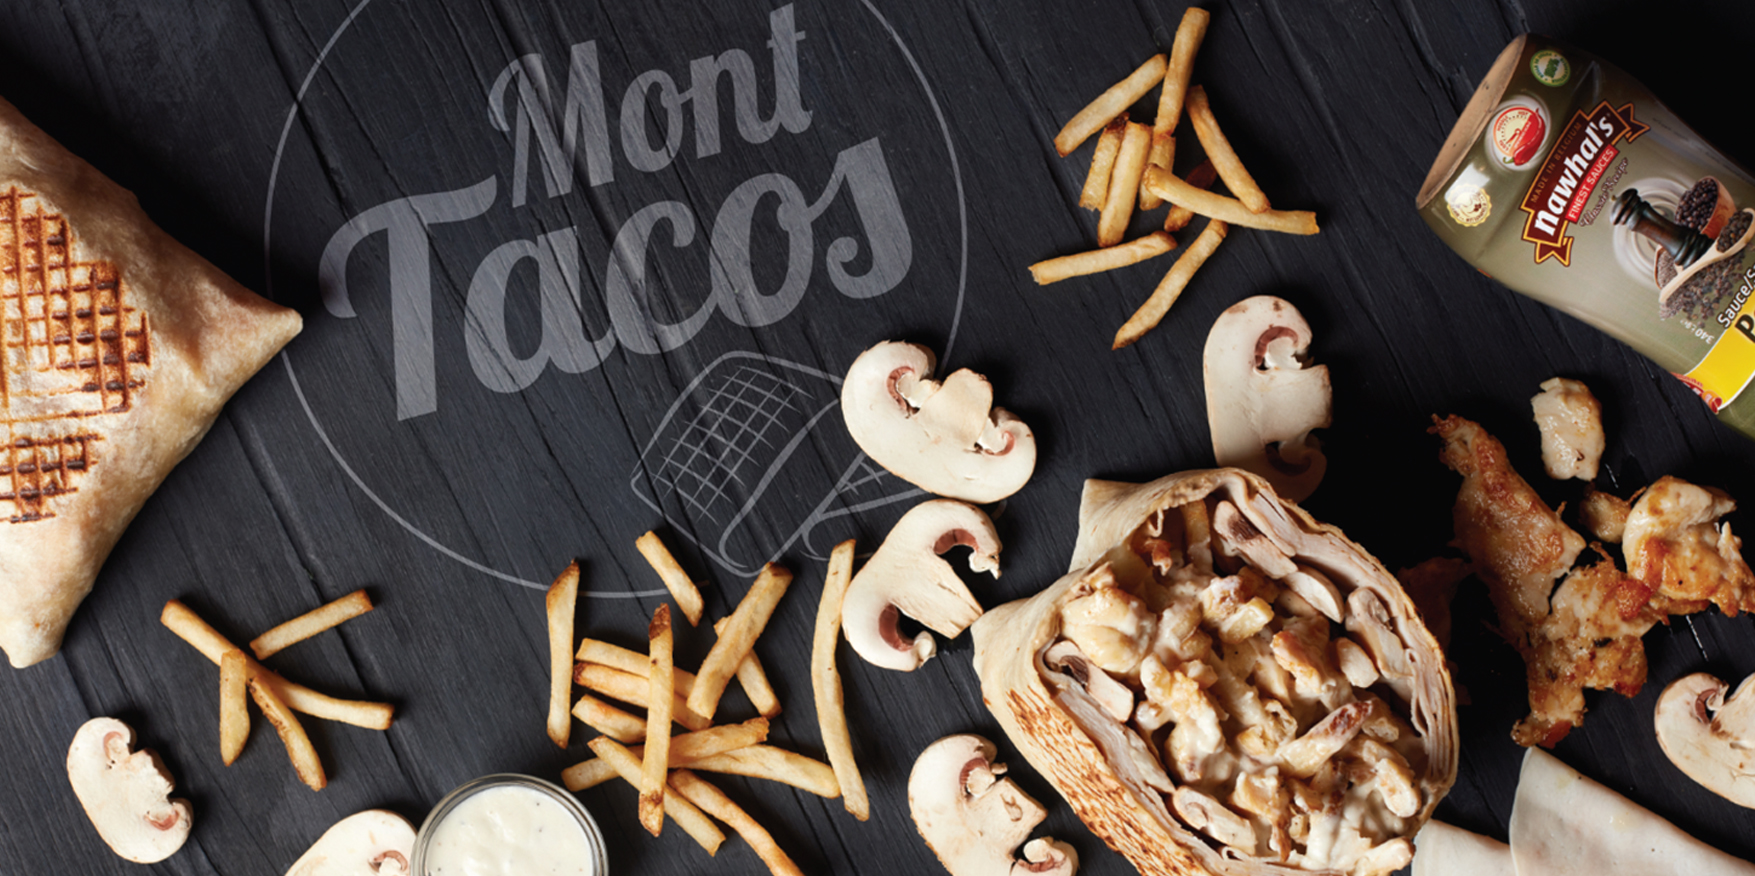 Mont Tacos soon at Avenue Mode